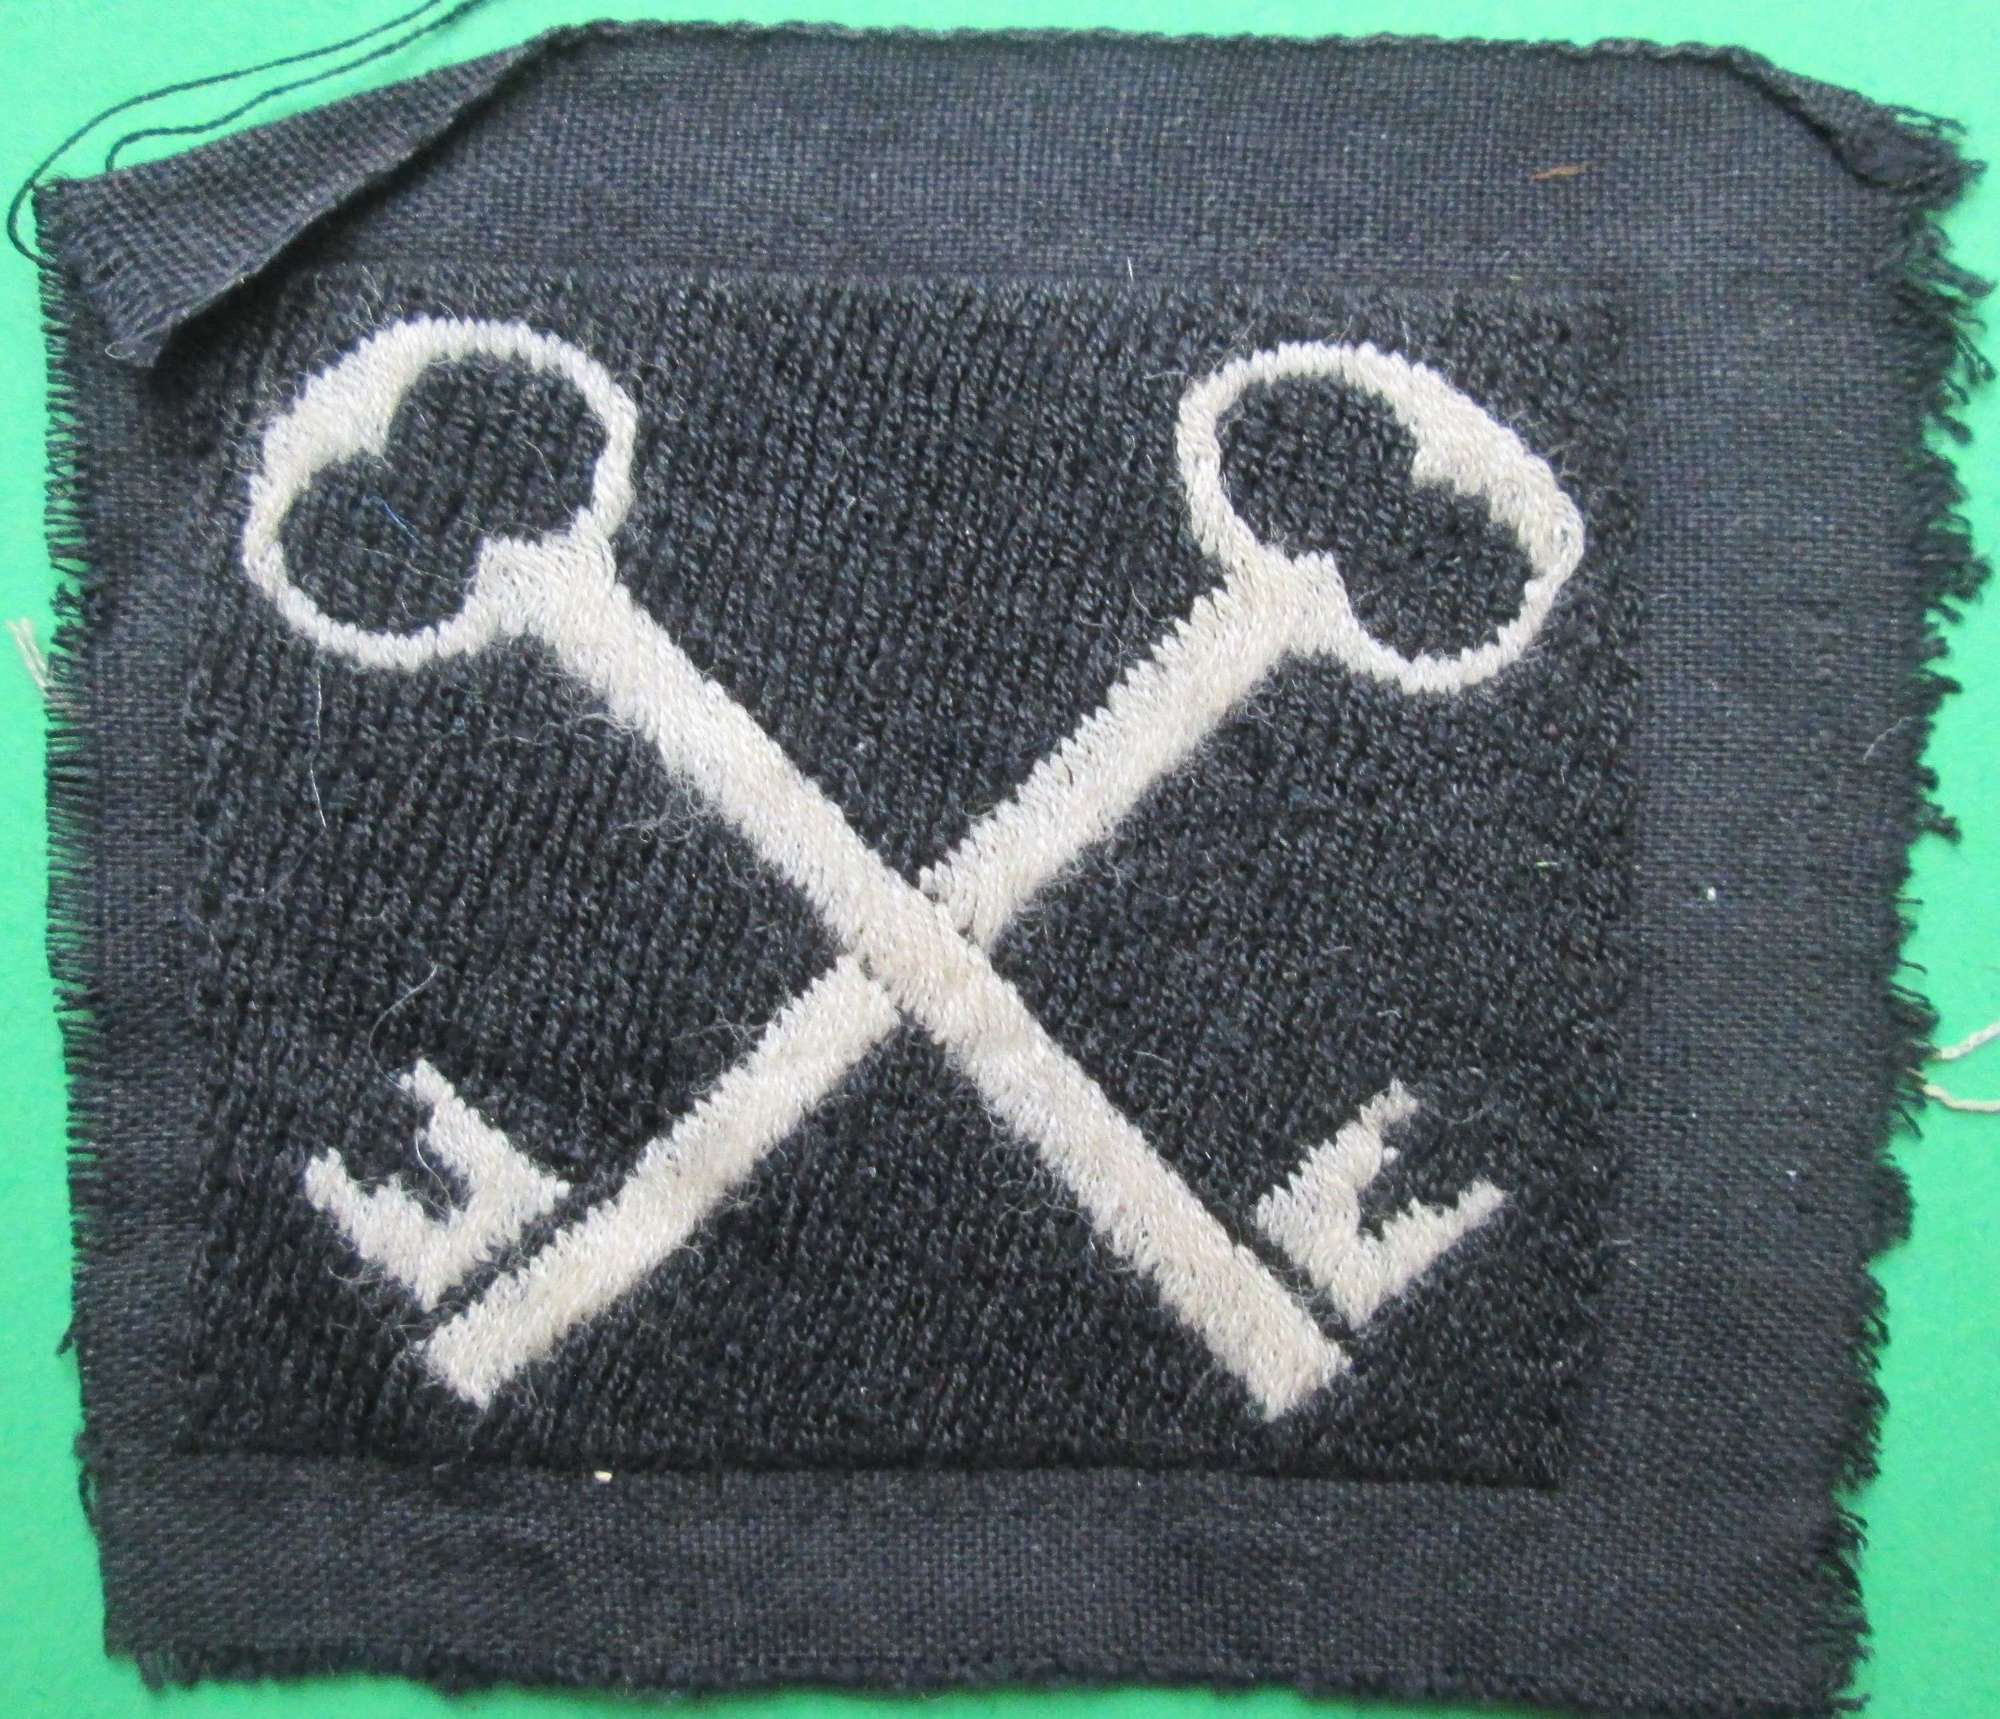 A 2ND INFANTRY DIVISION FORMATION PATCH